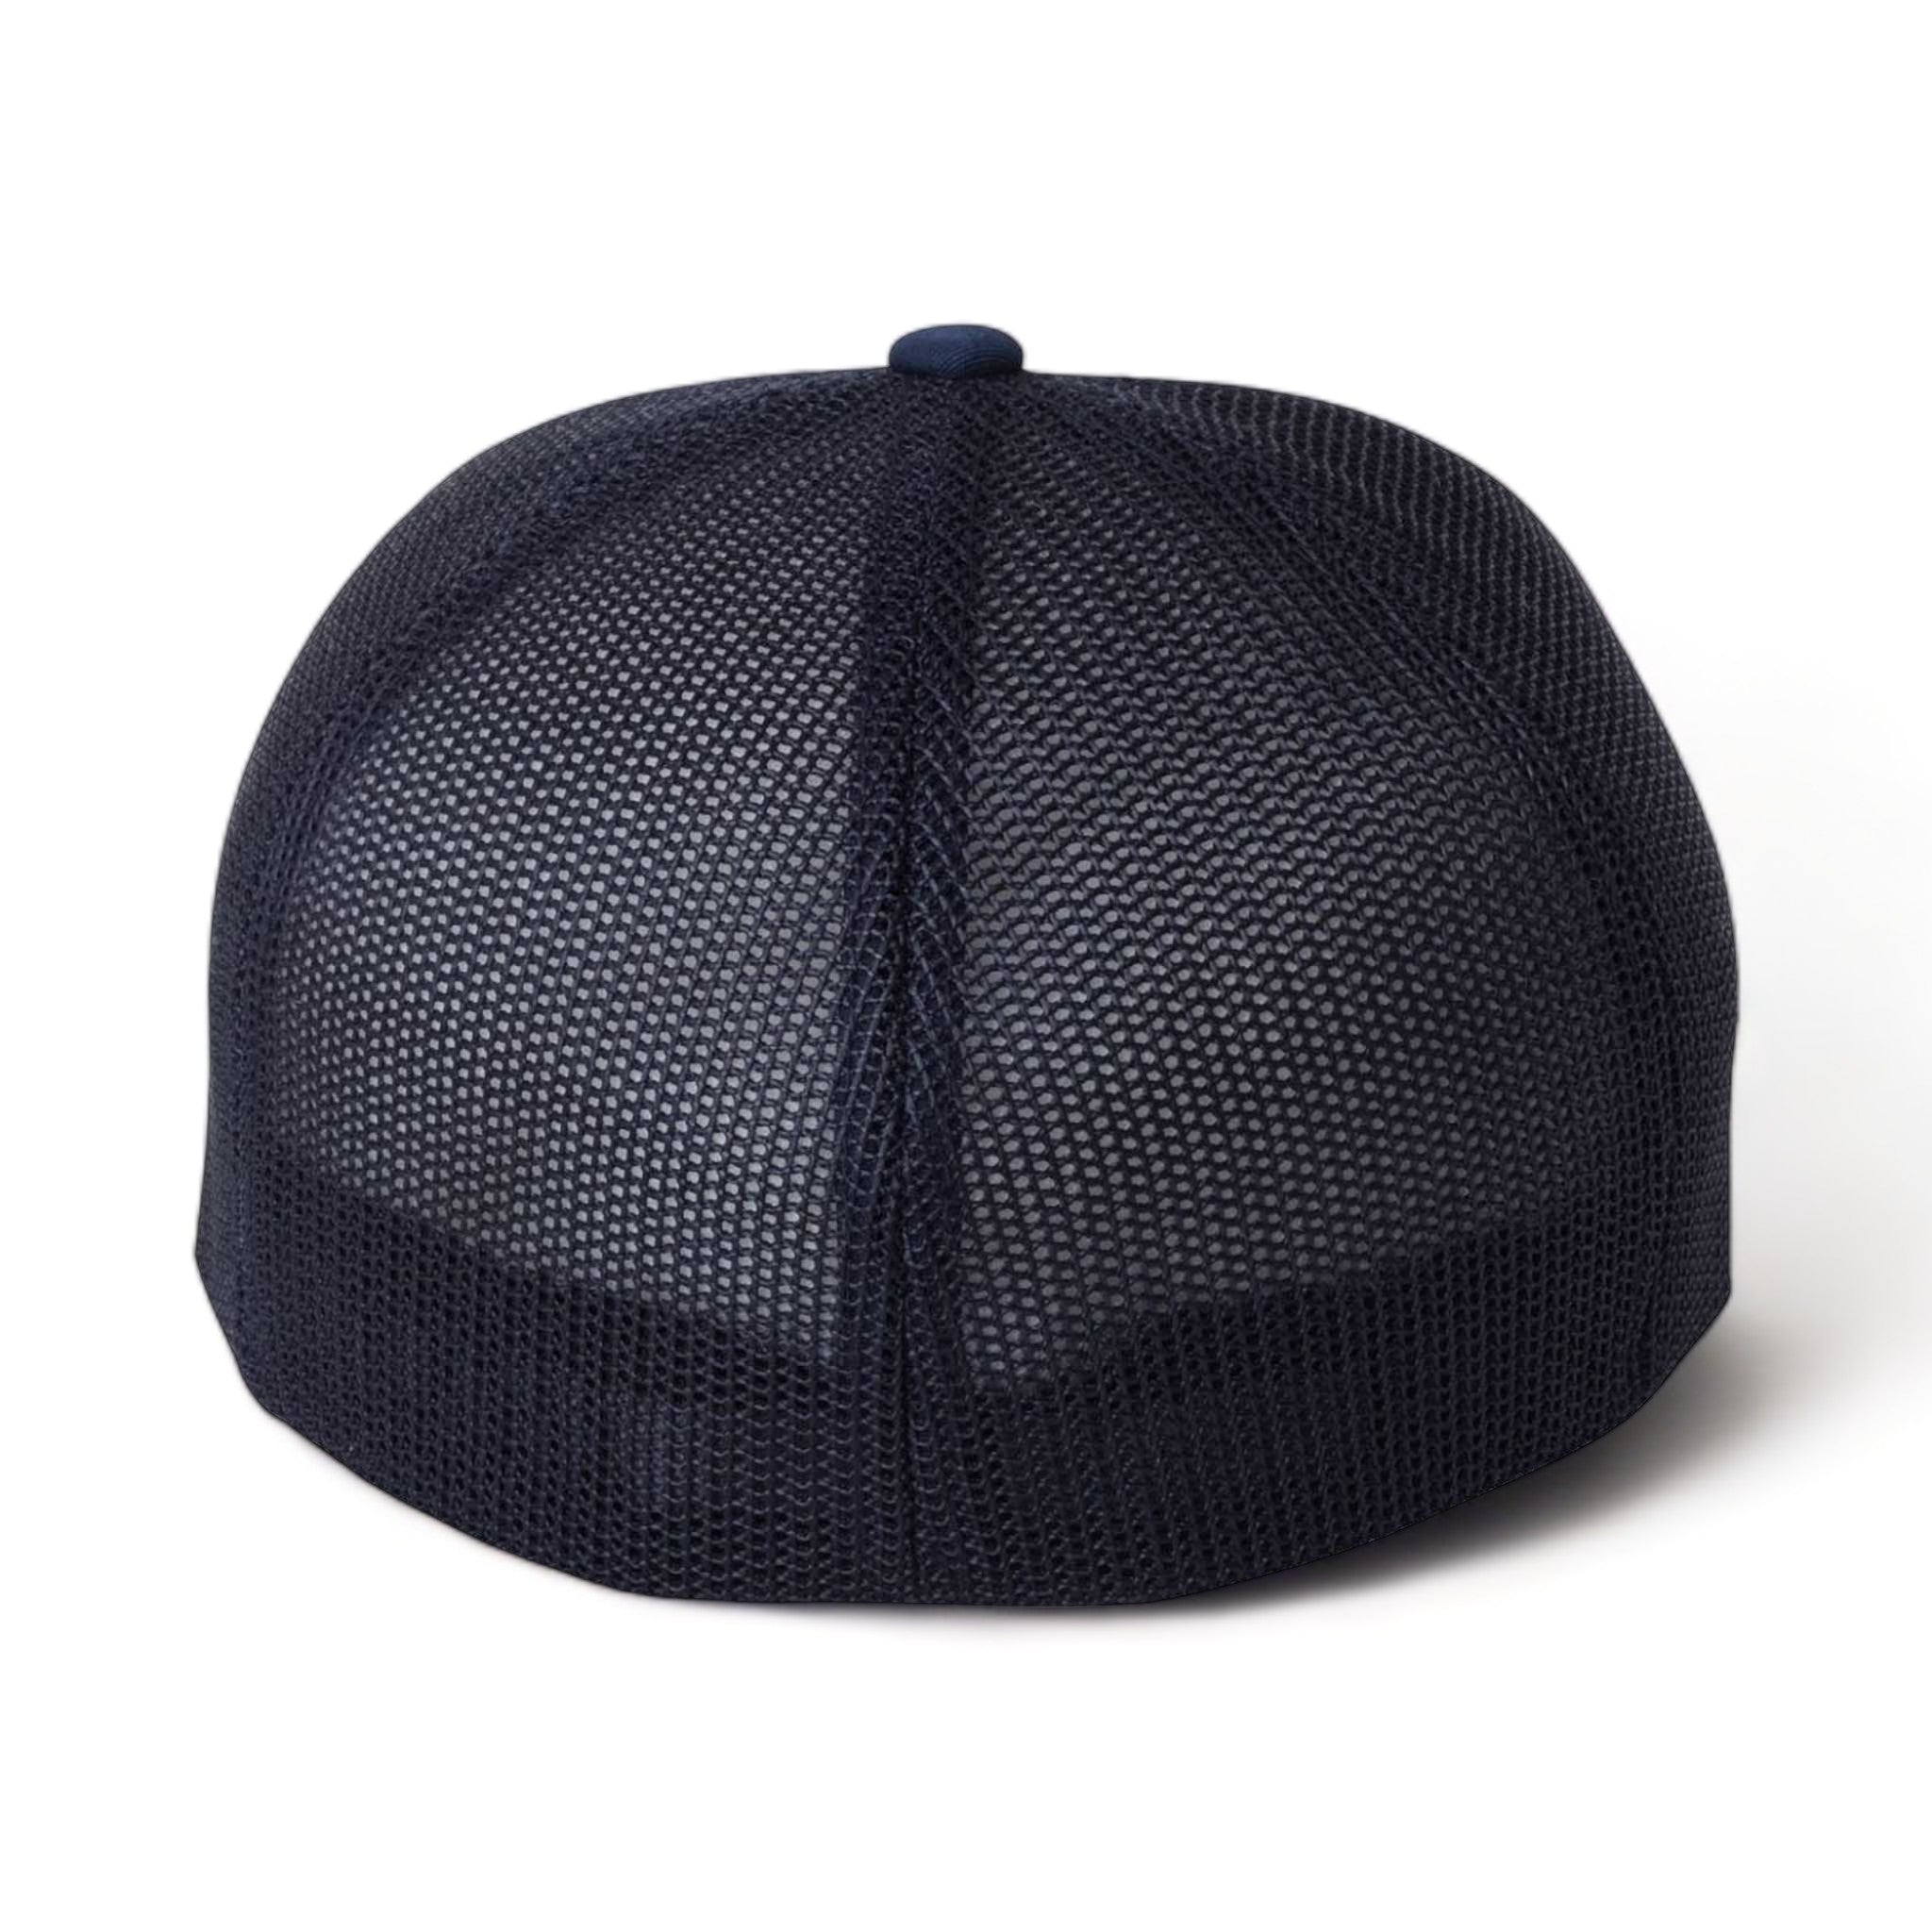 Back view of Flexfit 6511 custom hat in navy, white and navy